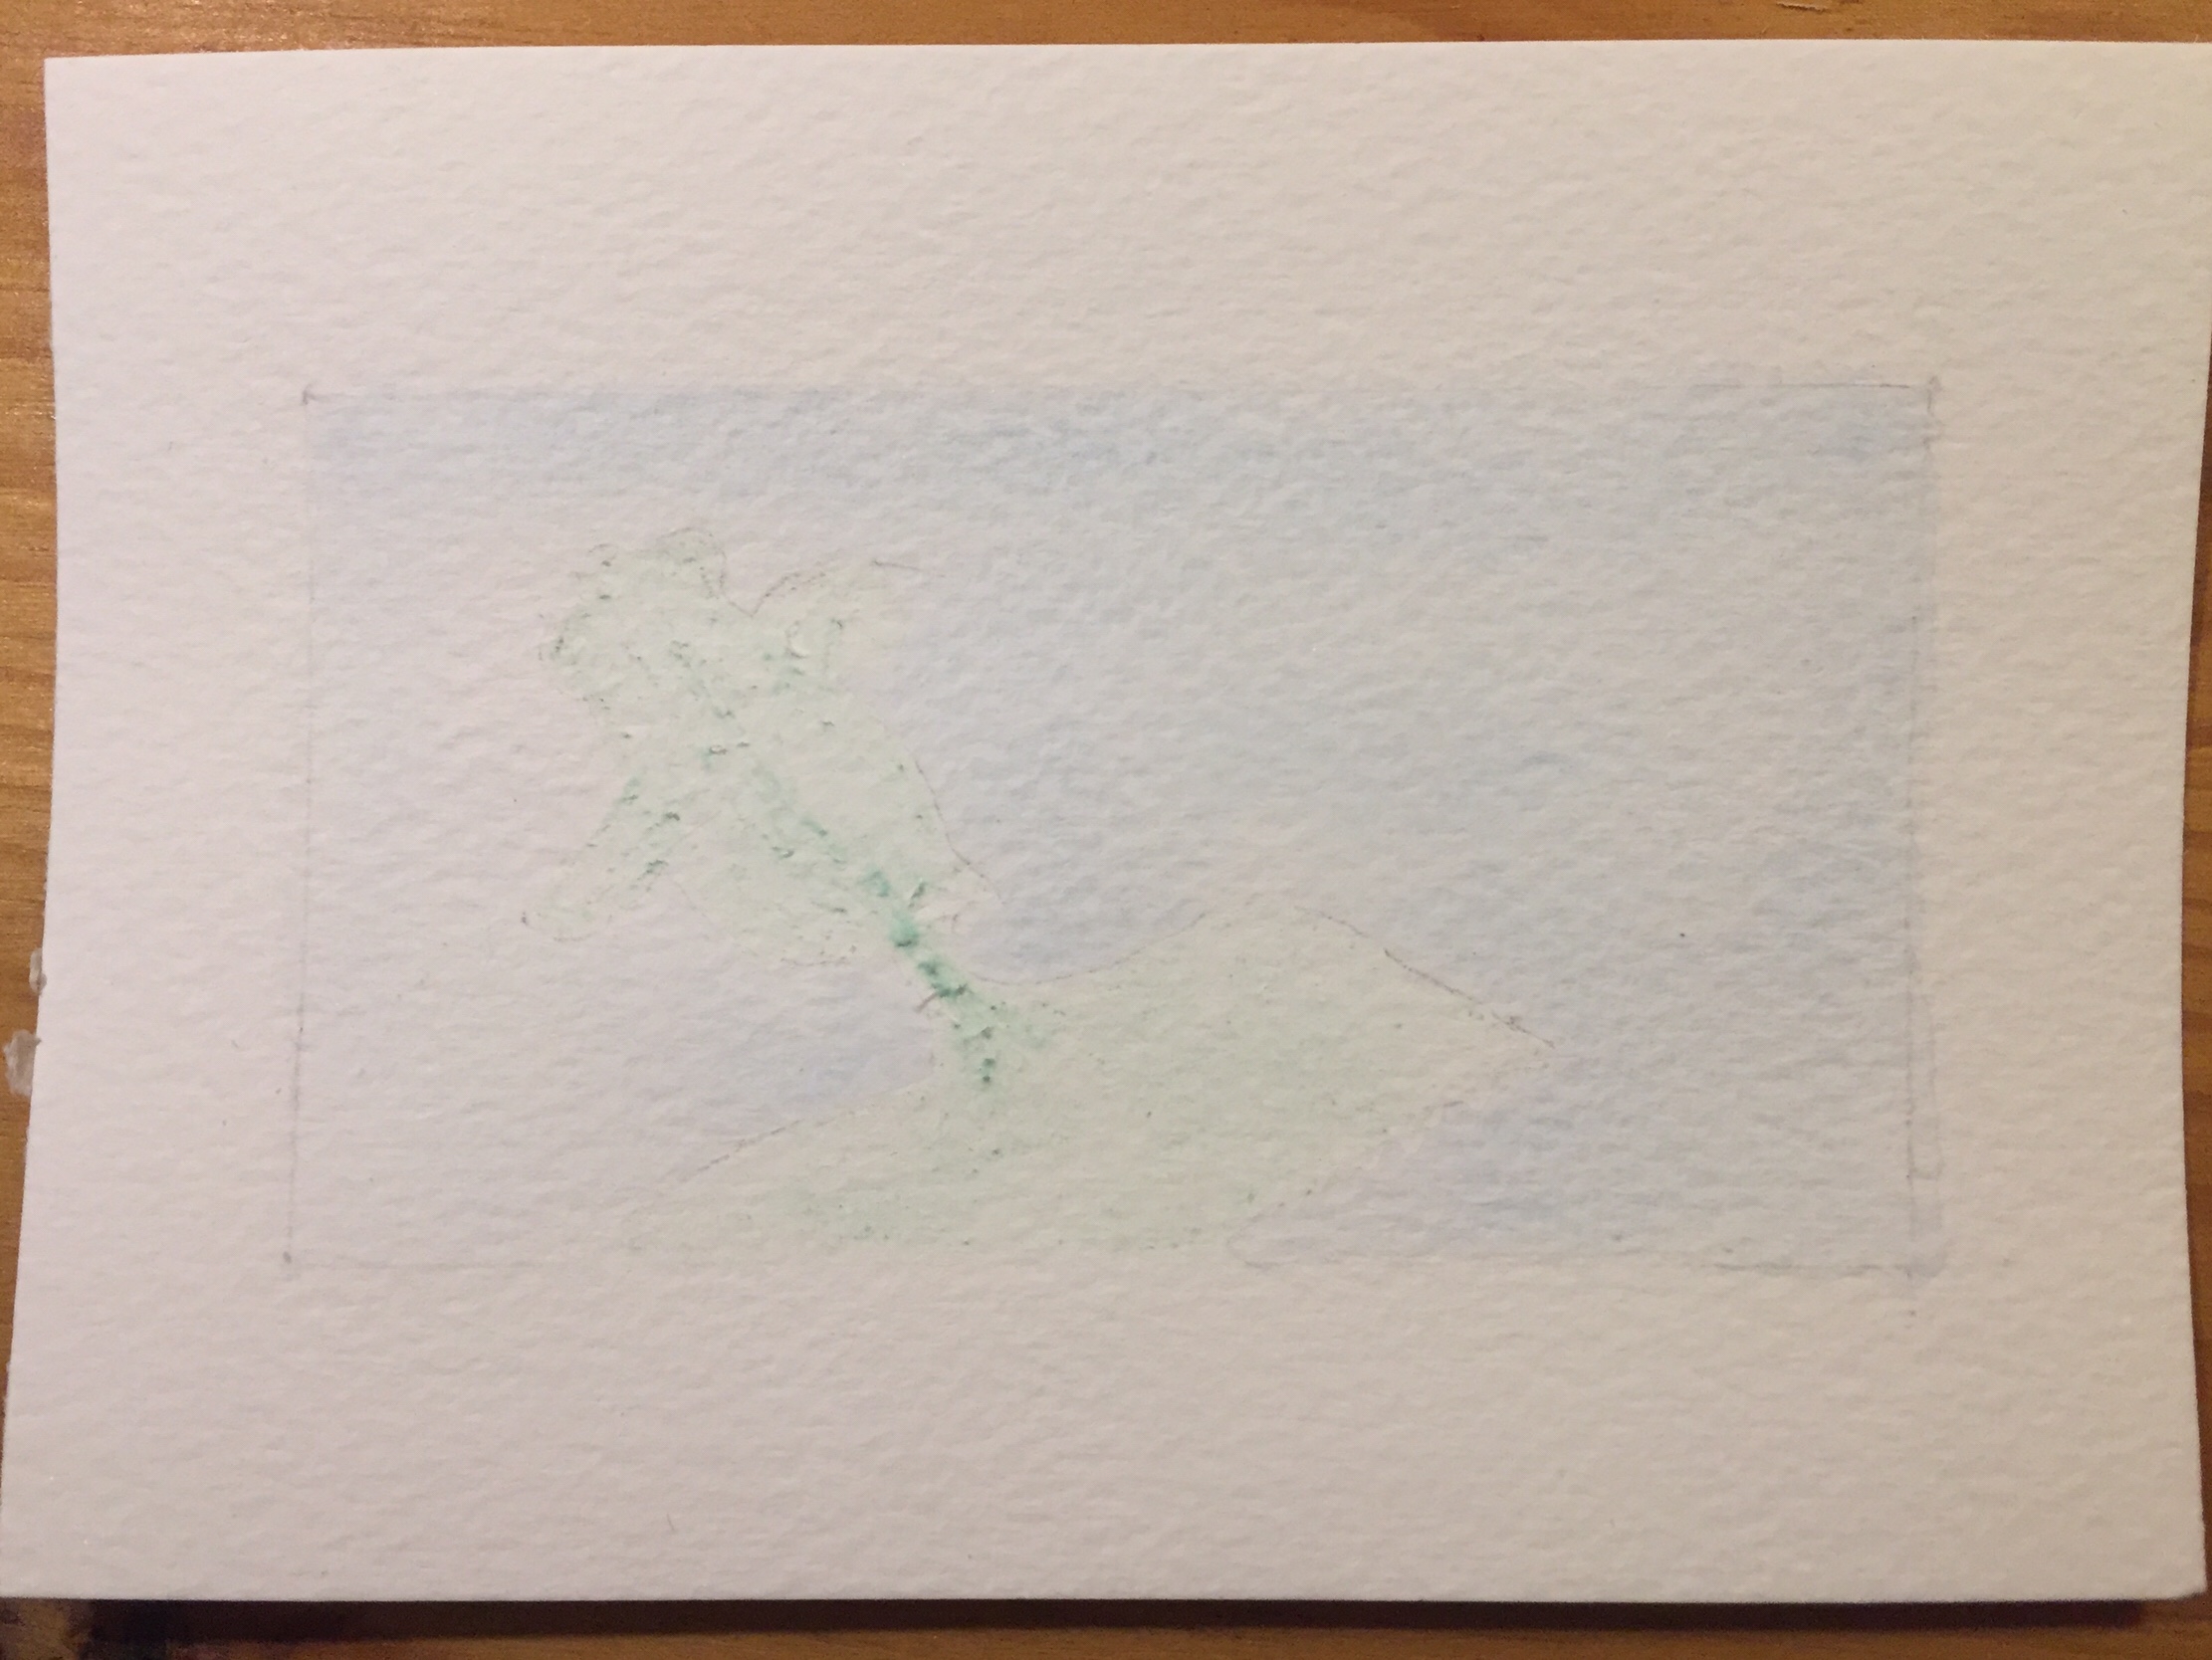 Scrapped paper and residue of the green masking fluid that would not be removed